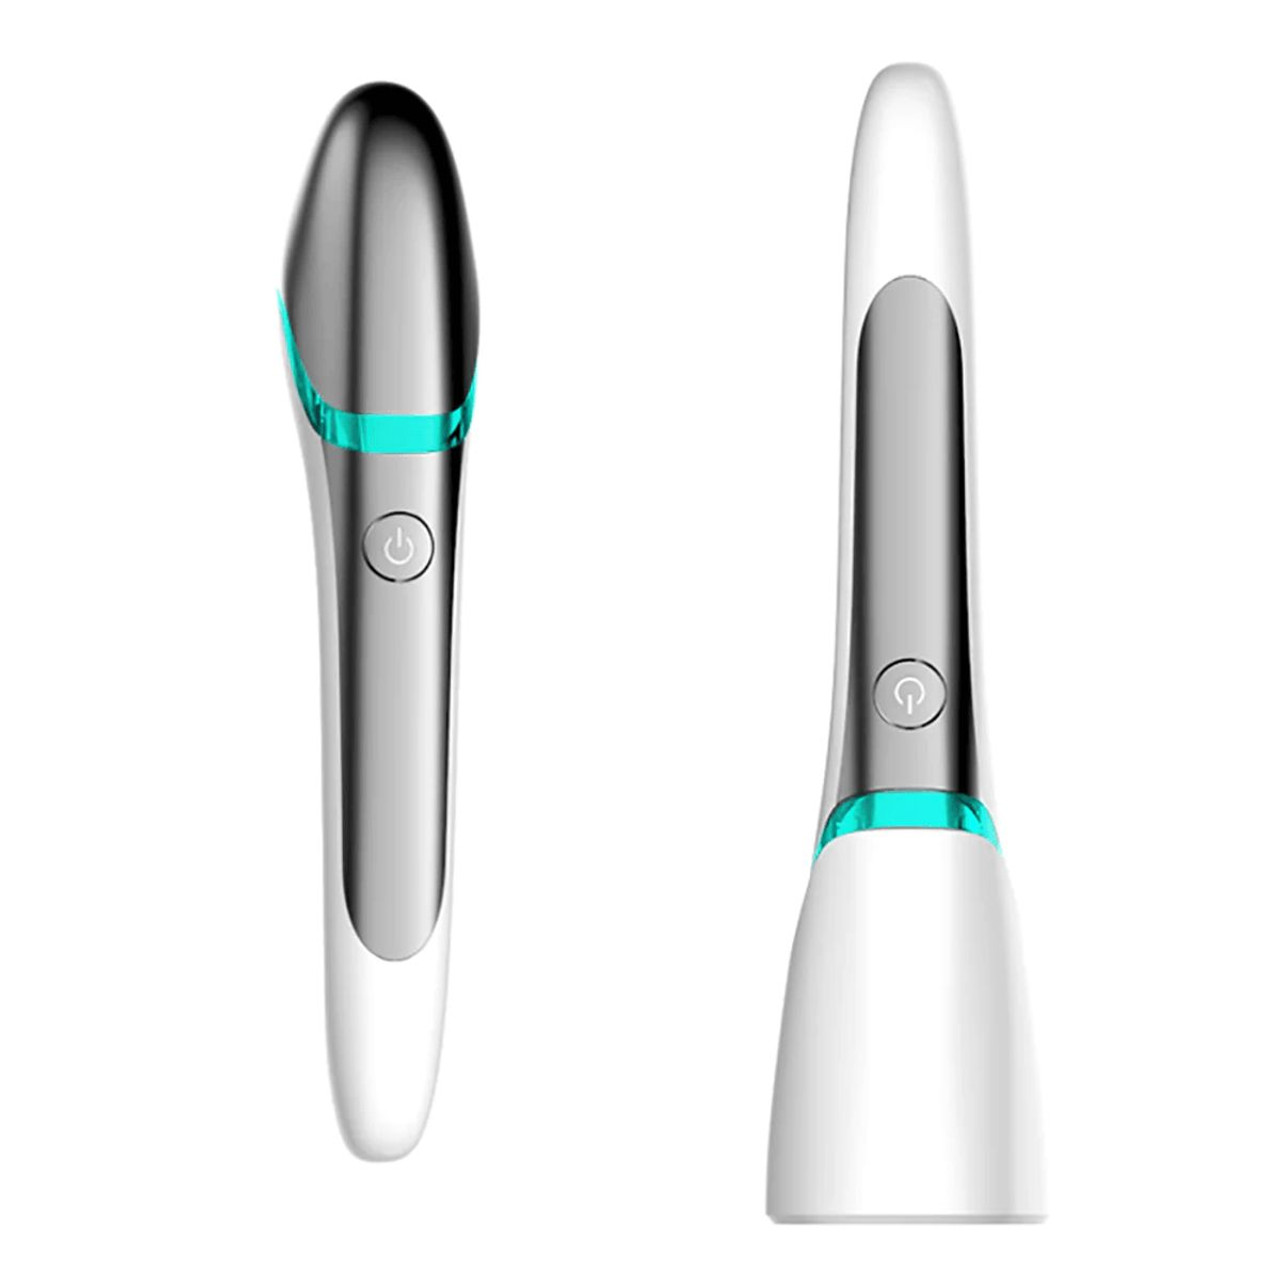 IntelliPen Anti-Aging EMS Facial Device by VYSN™ product image